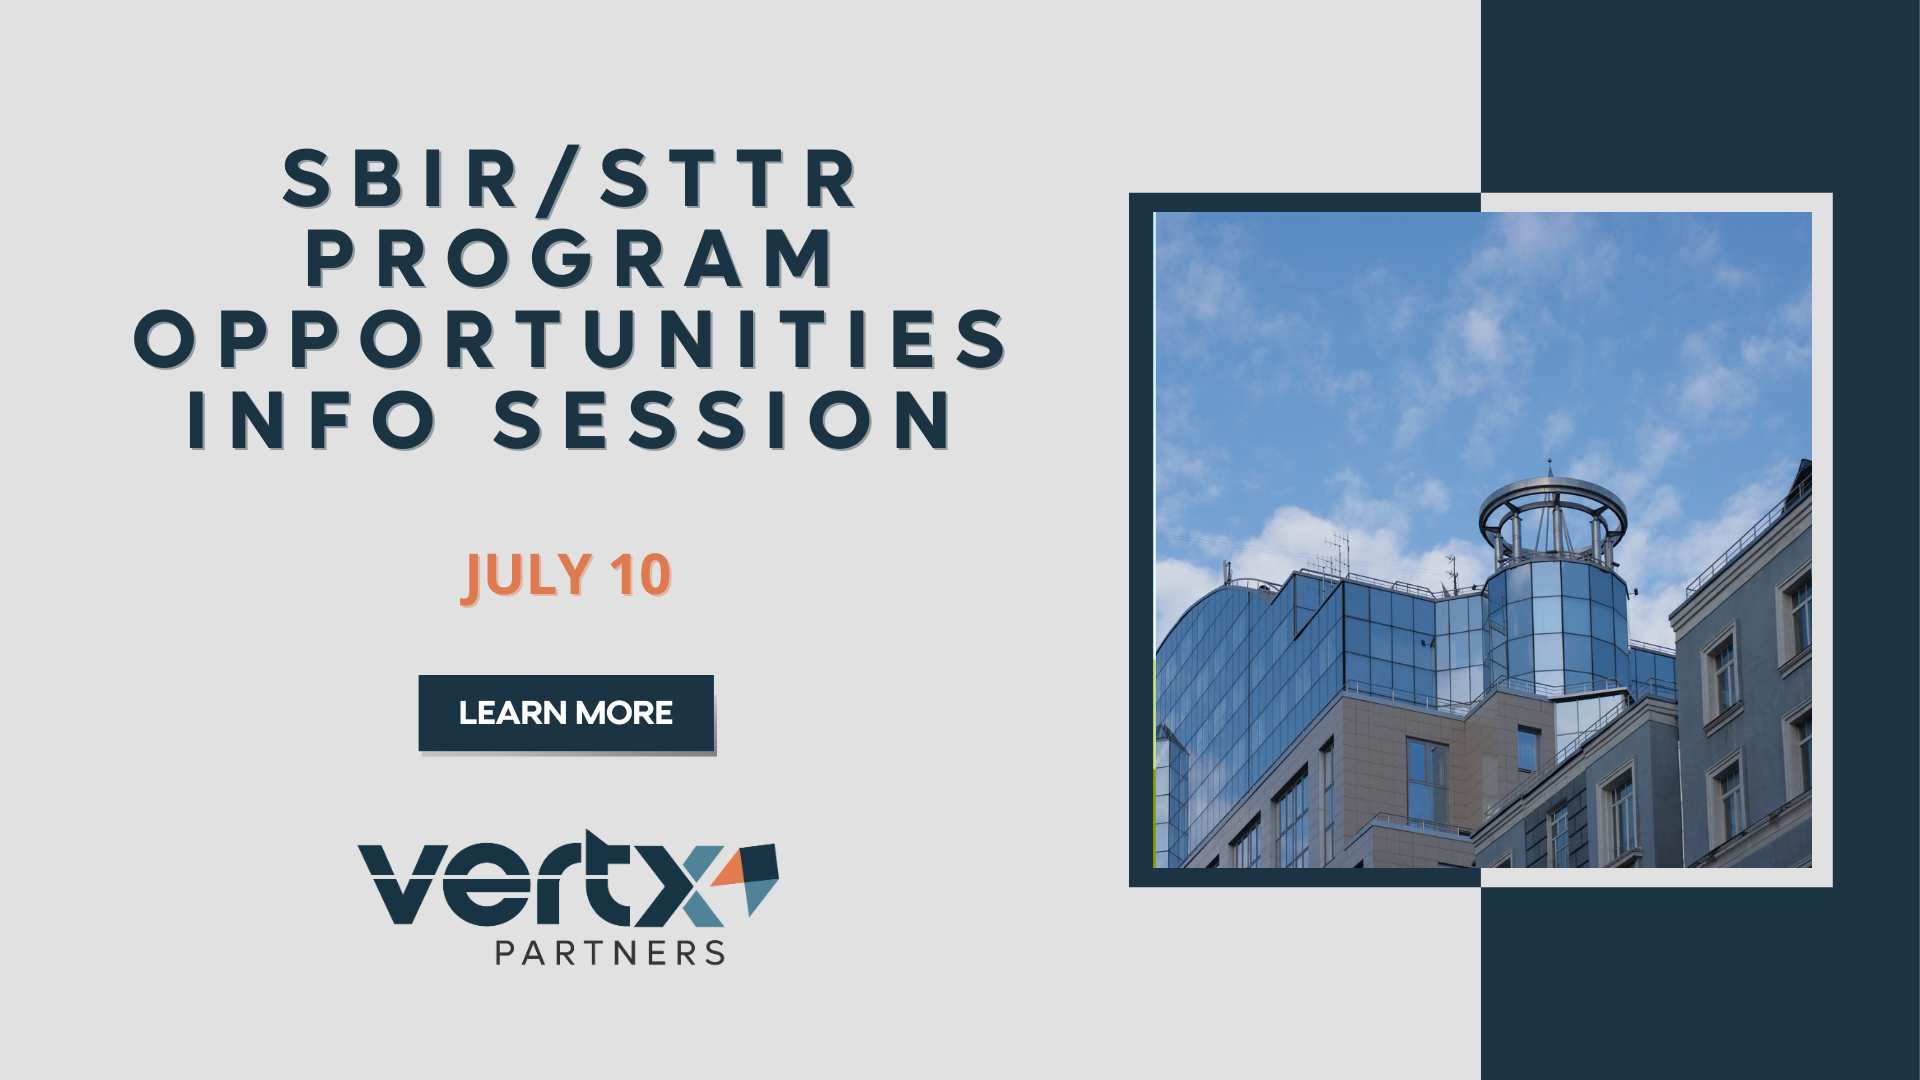 This graphic has the title "SBIR/STTR Program Opportunities Info Session" with the date July 10 underneath it and a photo to the right of it of a glass building with a blue sky above it.